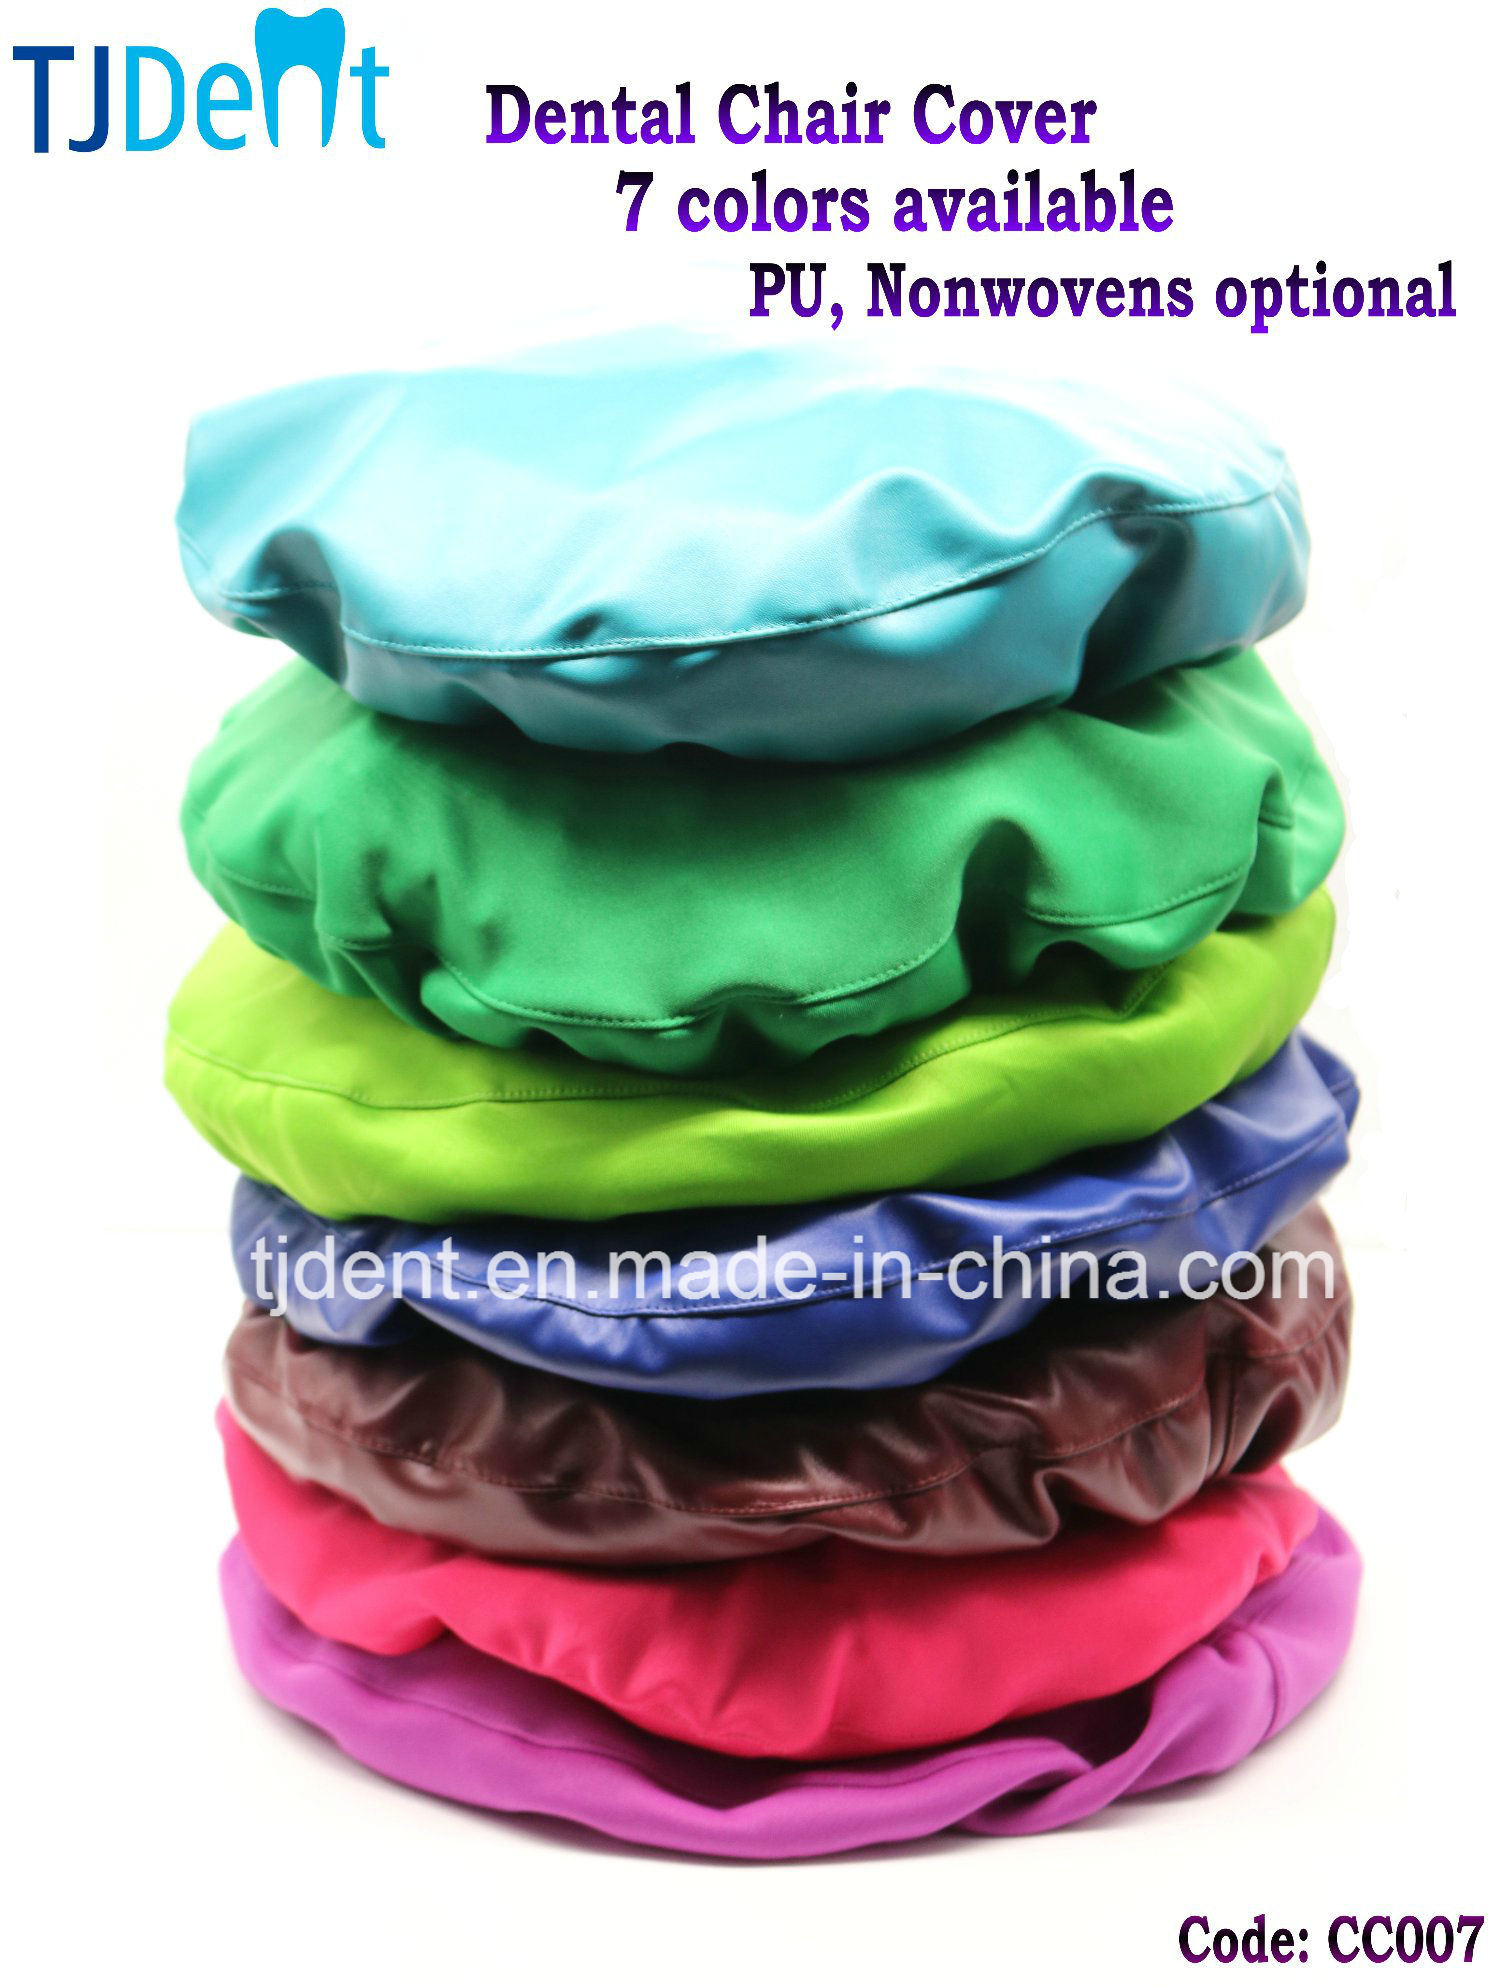 Dental Non-Disposable PU Material Optional Affordable Protective Chair Cover (CC007)